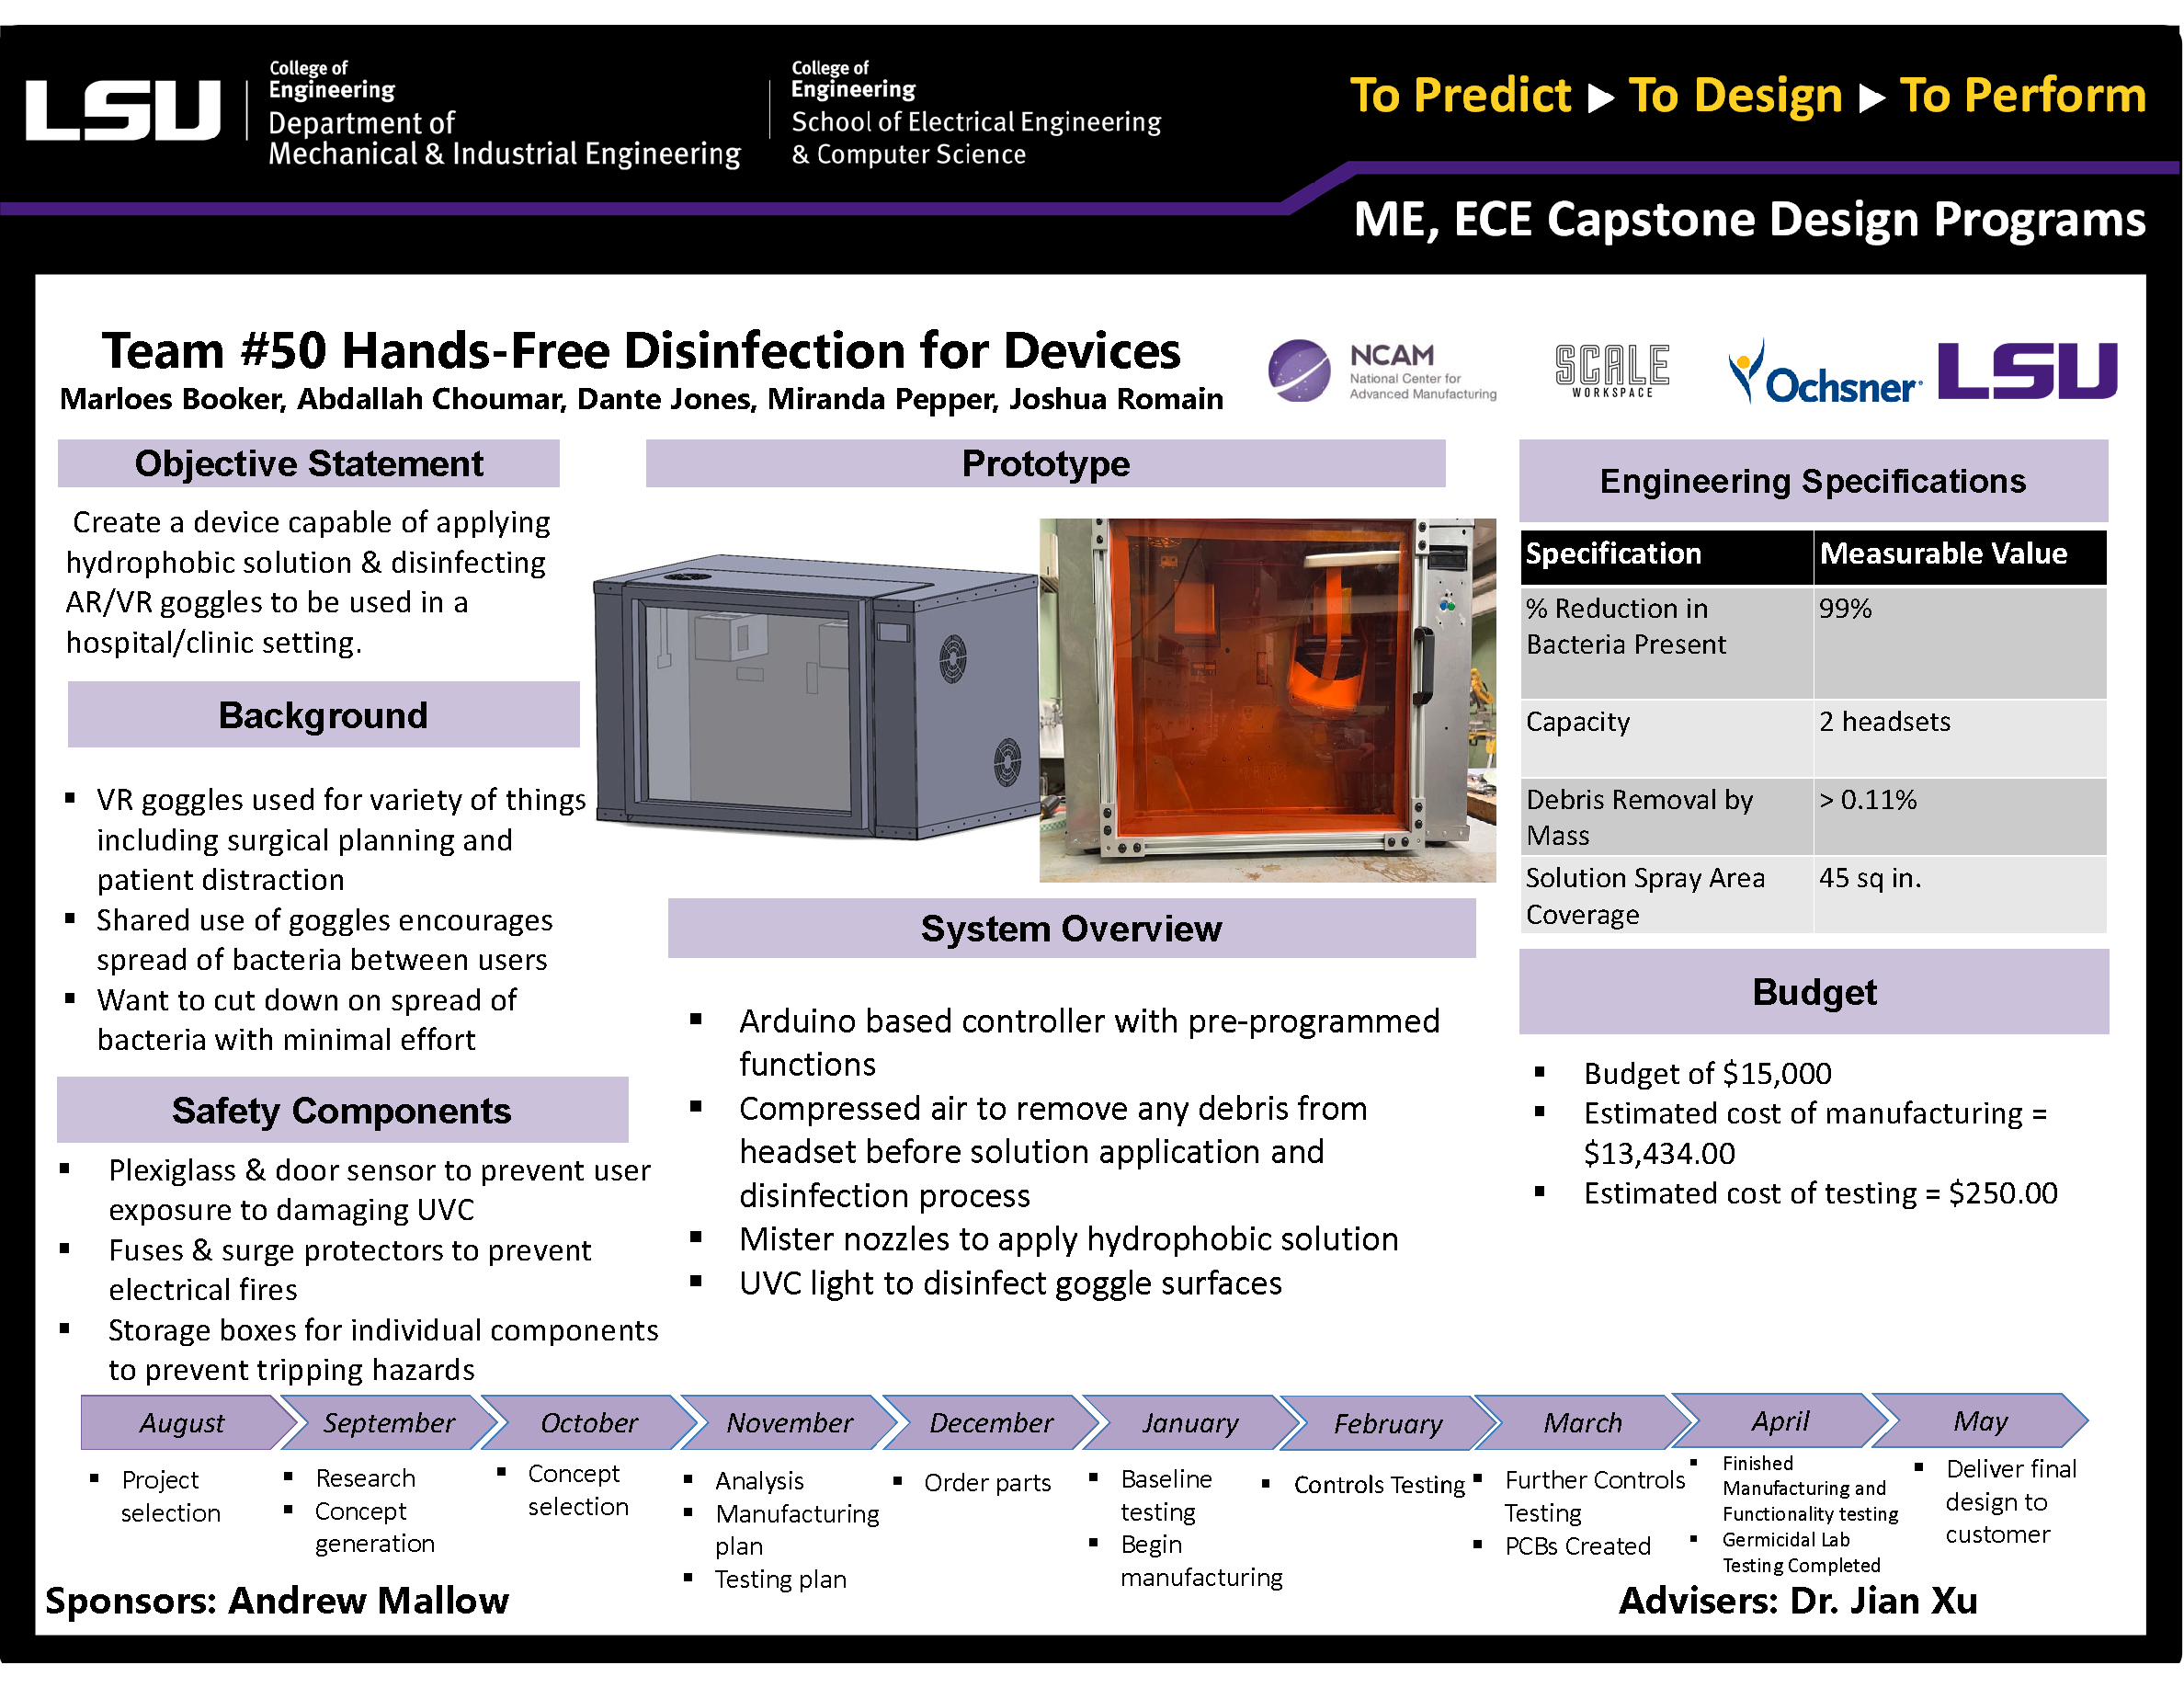 Project 50: Hands-Free Disinfection for Devices (2021)